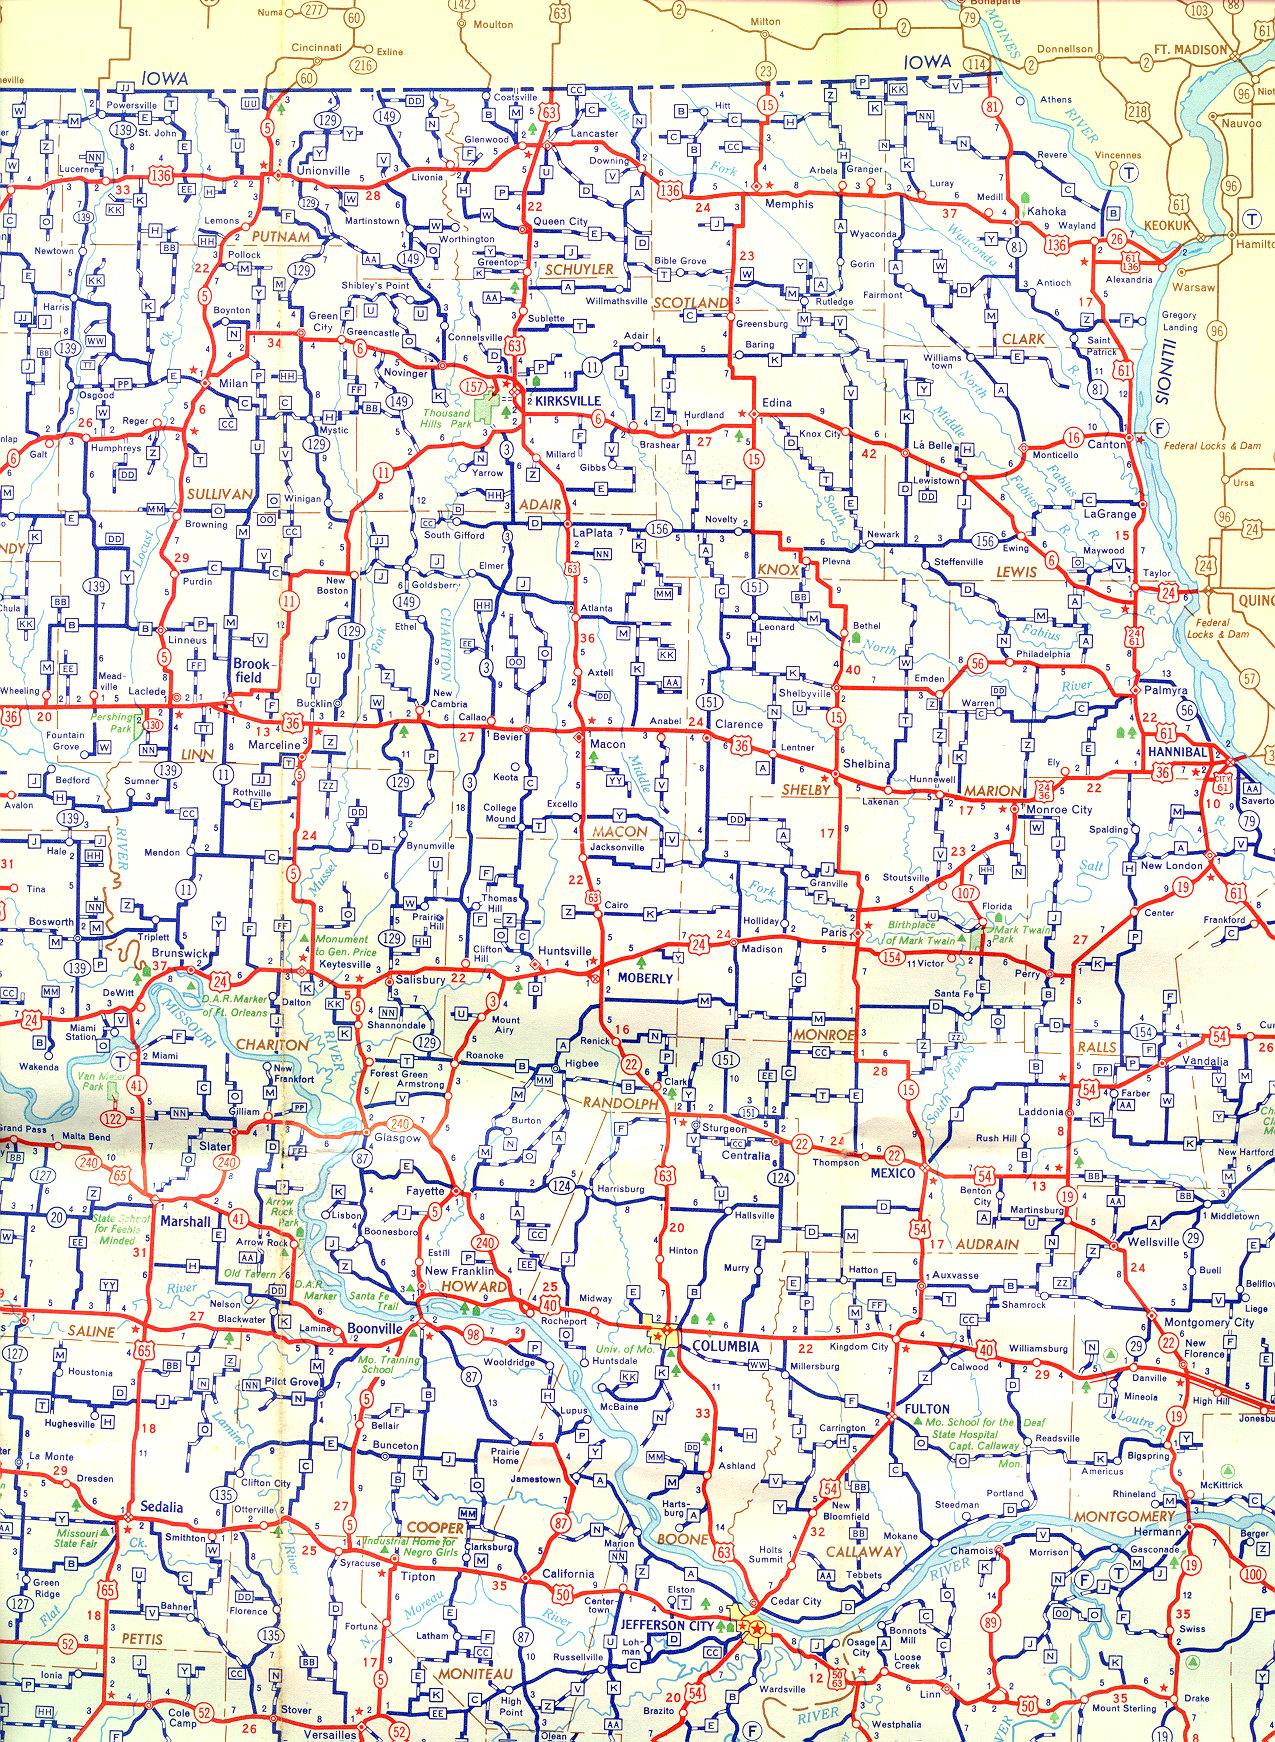 Section of 1956 official highway map for Missouri